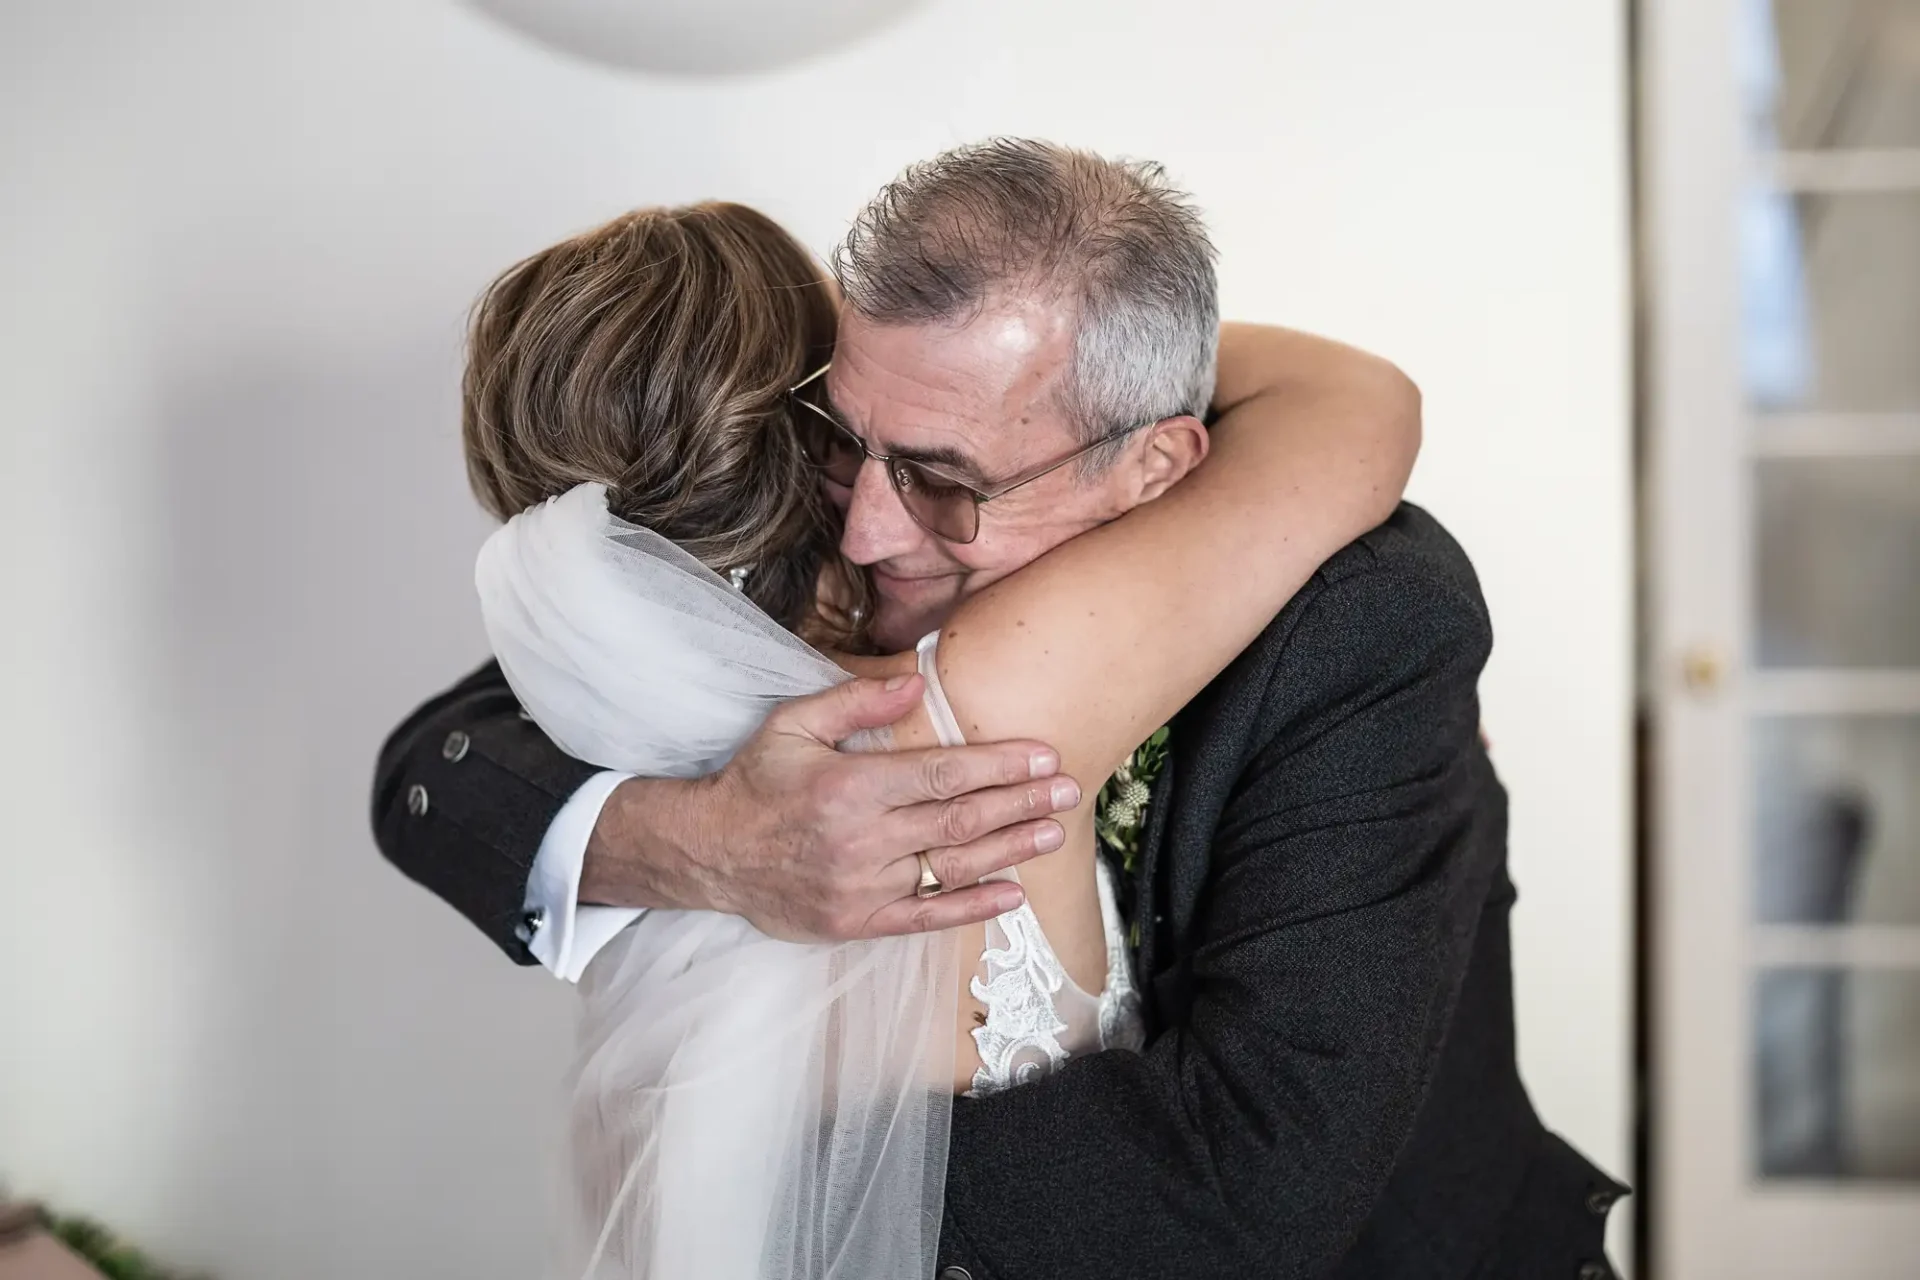 An older man in a suit hugs a younger woman in a white wedding dress, both smiling during an emotional embrace.